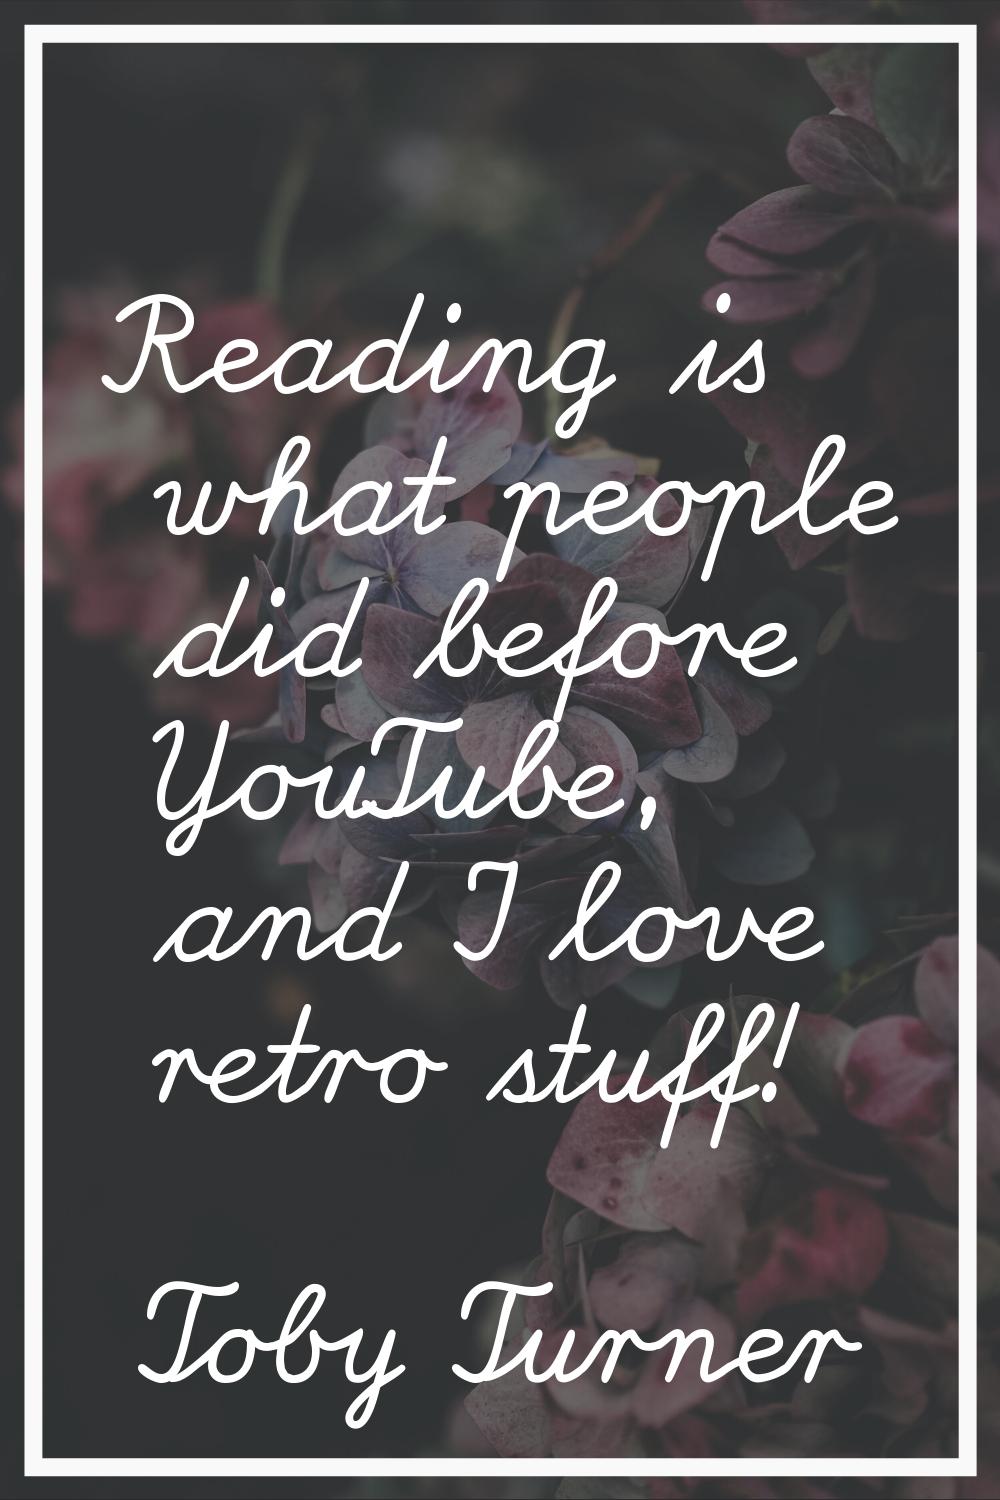 Reading is what people did before YouTube, and I love retro stuff!